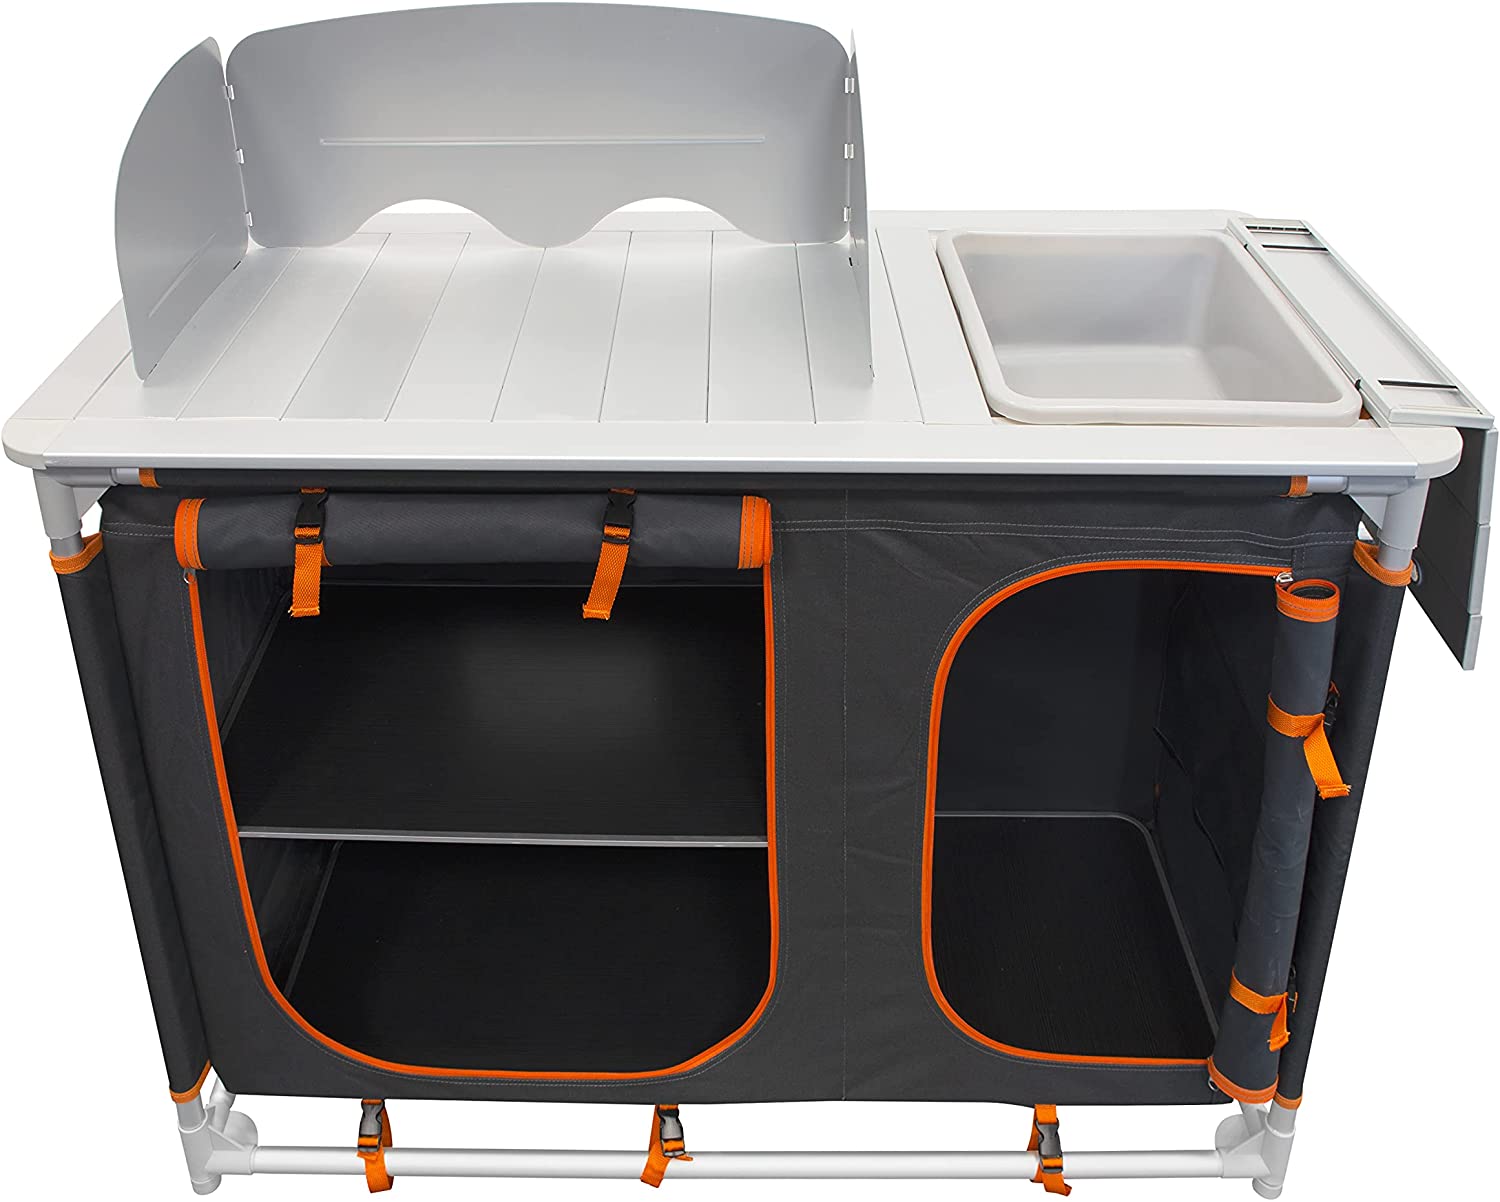 camping kitchen set with sink